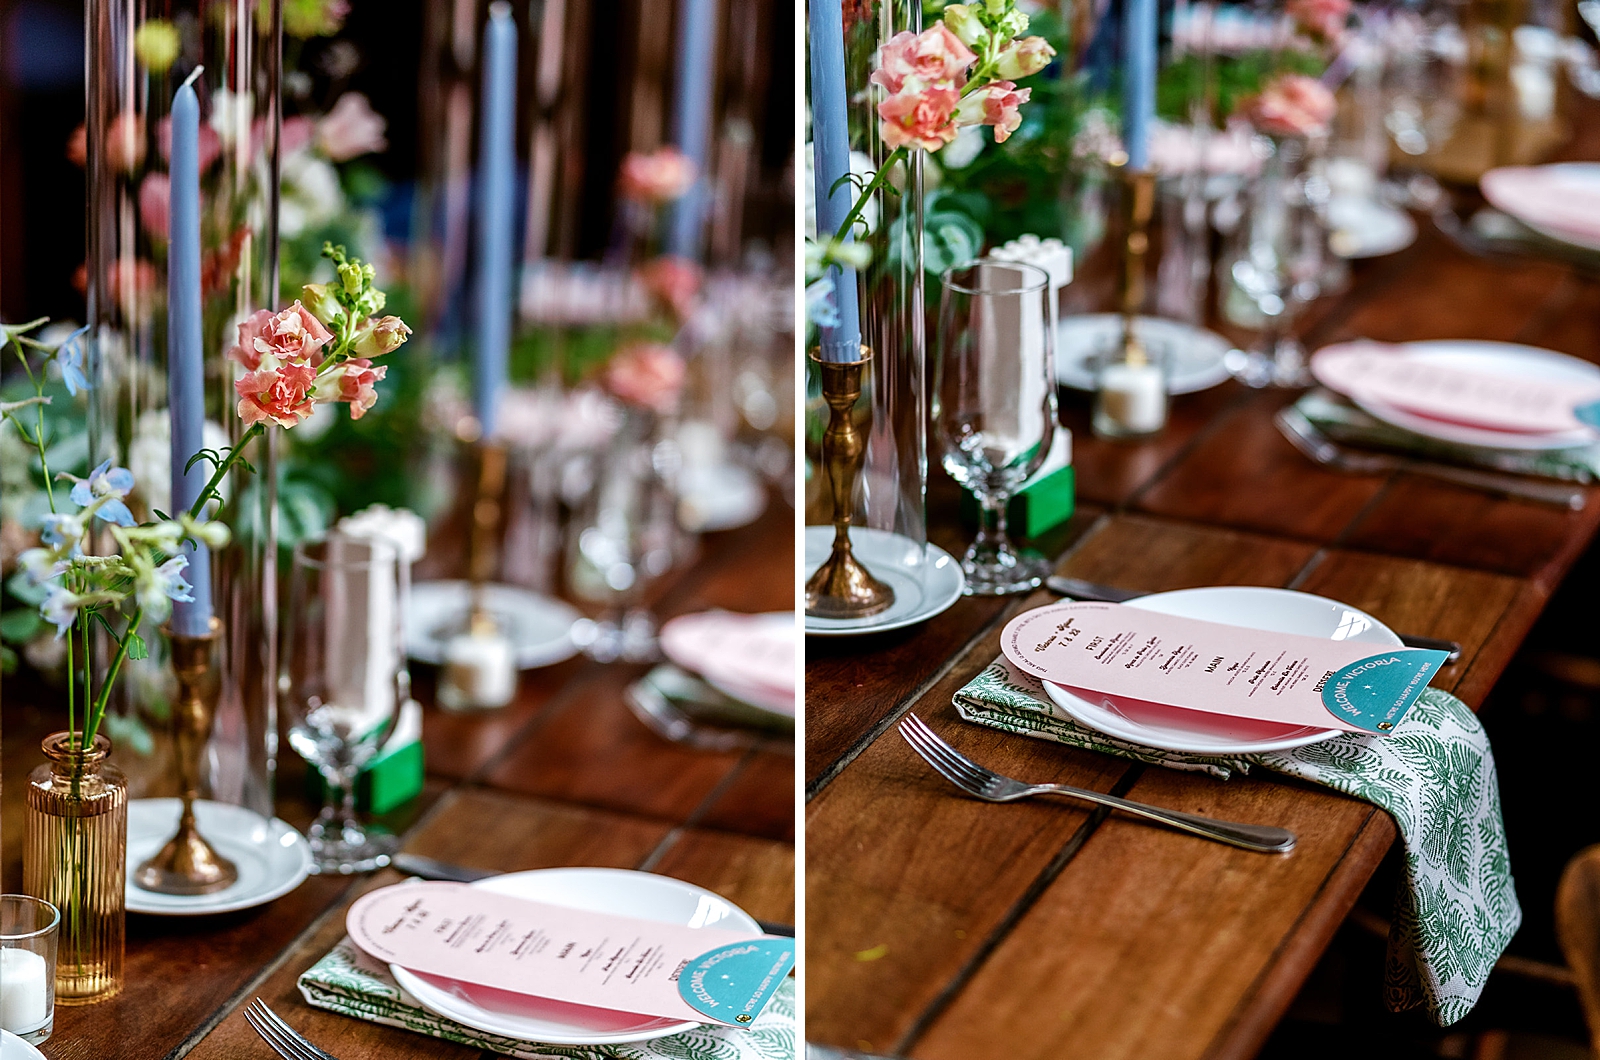 Left photo: Close up shot of the details on the reception tables, including menus, place settings, and flower arrangements.
Right photo: Close up shot of the details on the reception tables, including menus, place settings, and flower arrangements.